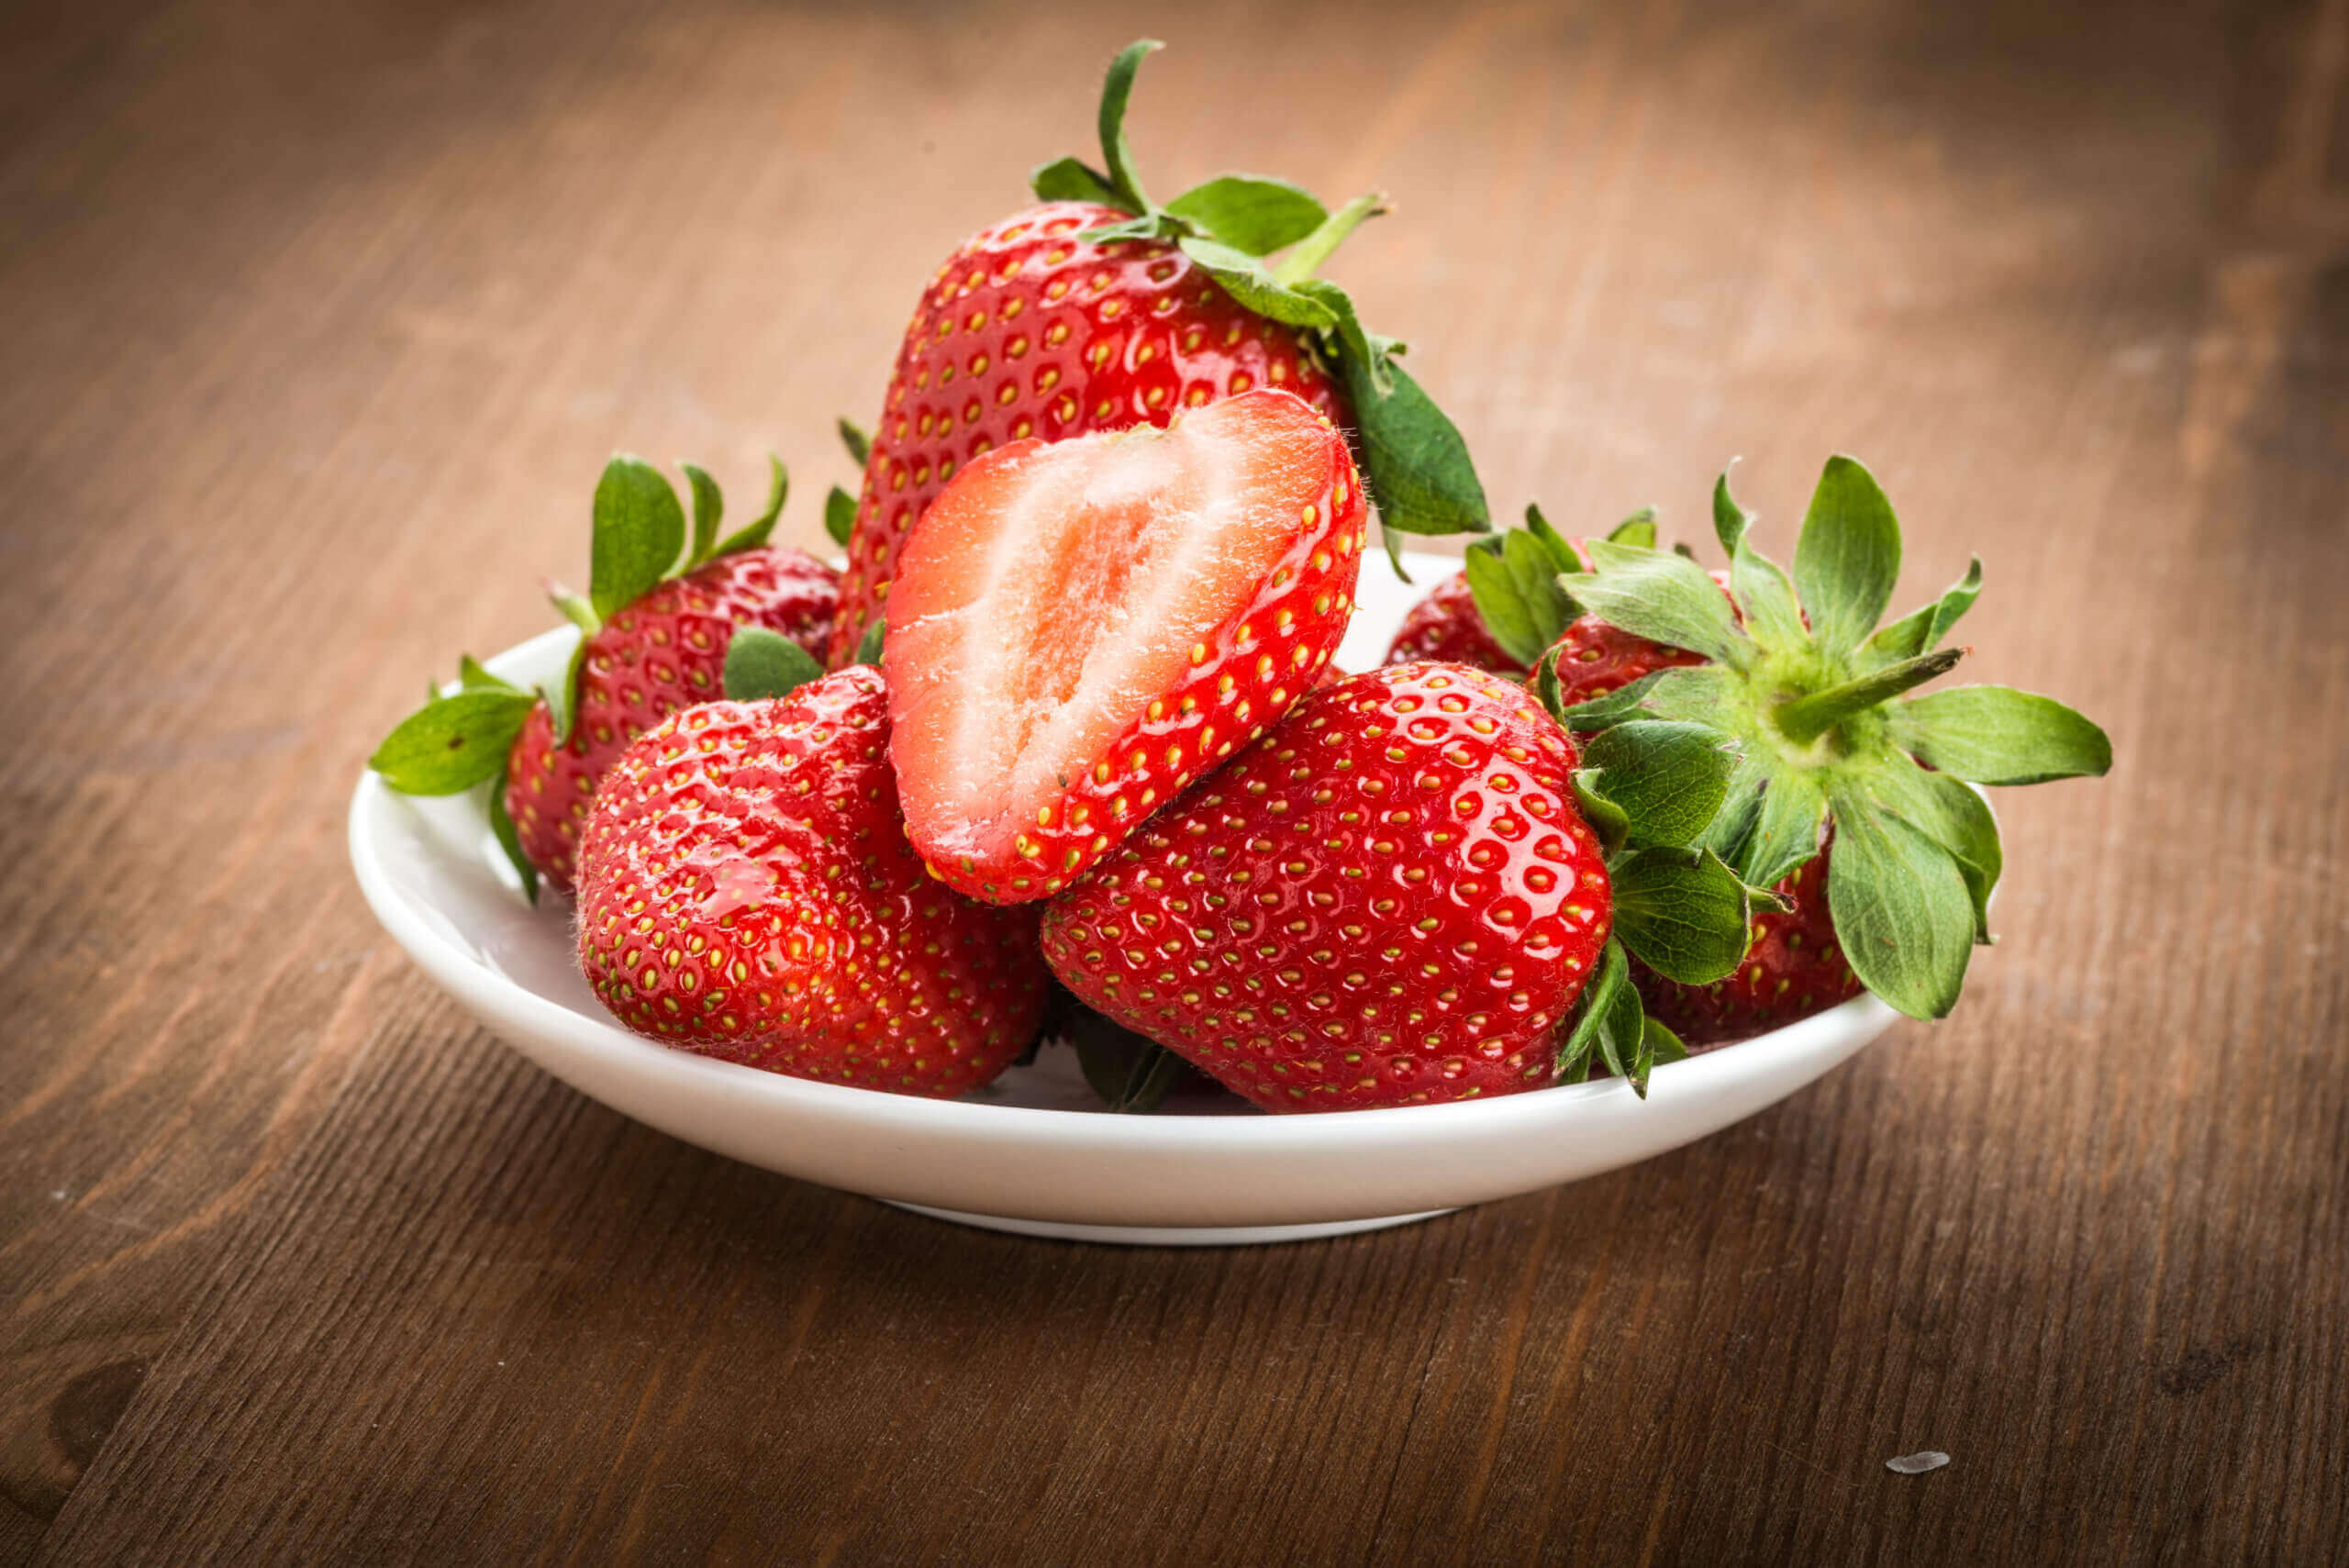 A plate of fresh strawberries.